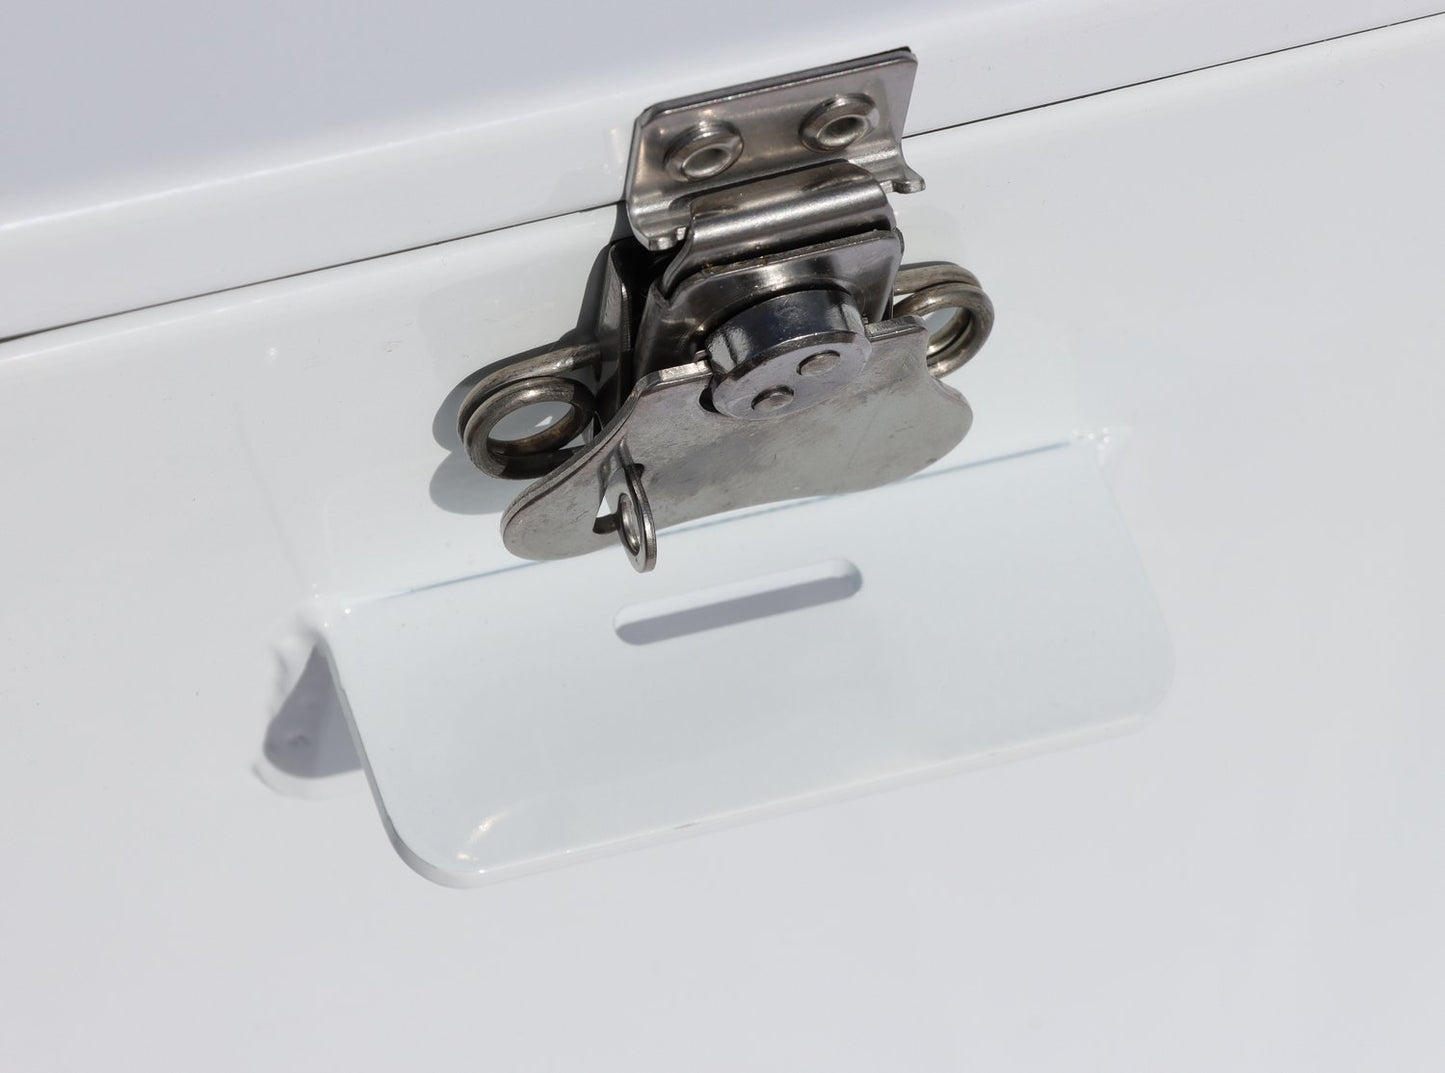 A close up of a Rio Craft Powder-Coated Aluminum Drybox lock on a white door featuring maximum security.